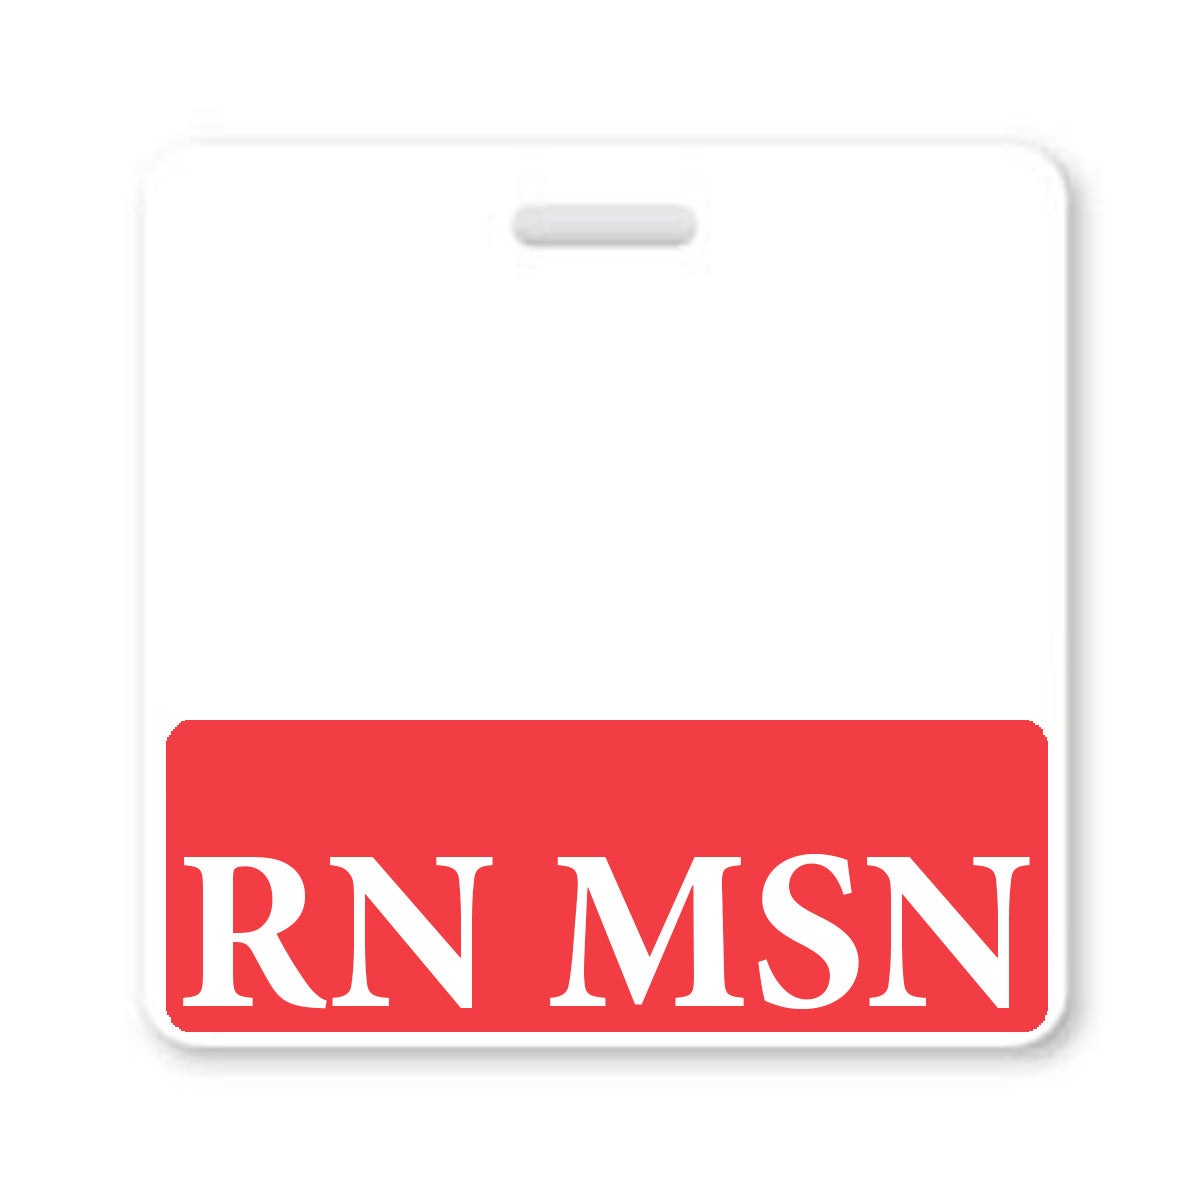 A square badge with a white top half and a red bottom half displaying the text "RN MSN" in white capital letters, perfect as an RN MSN Badge Buddy Horizontal for Nurse - Double Sided Print ID Badge Backer (Standard Size) for any Nurse ID Badge.